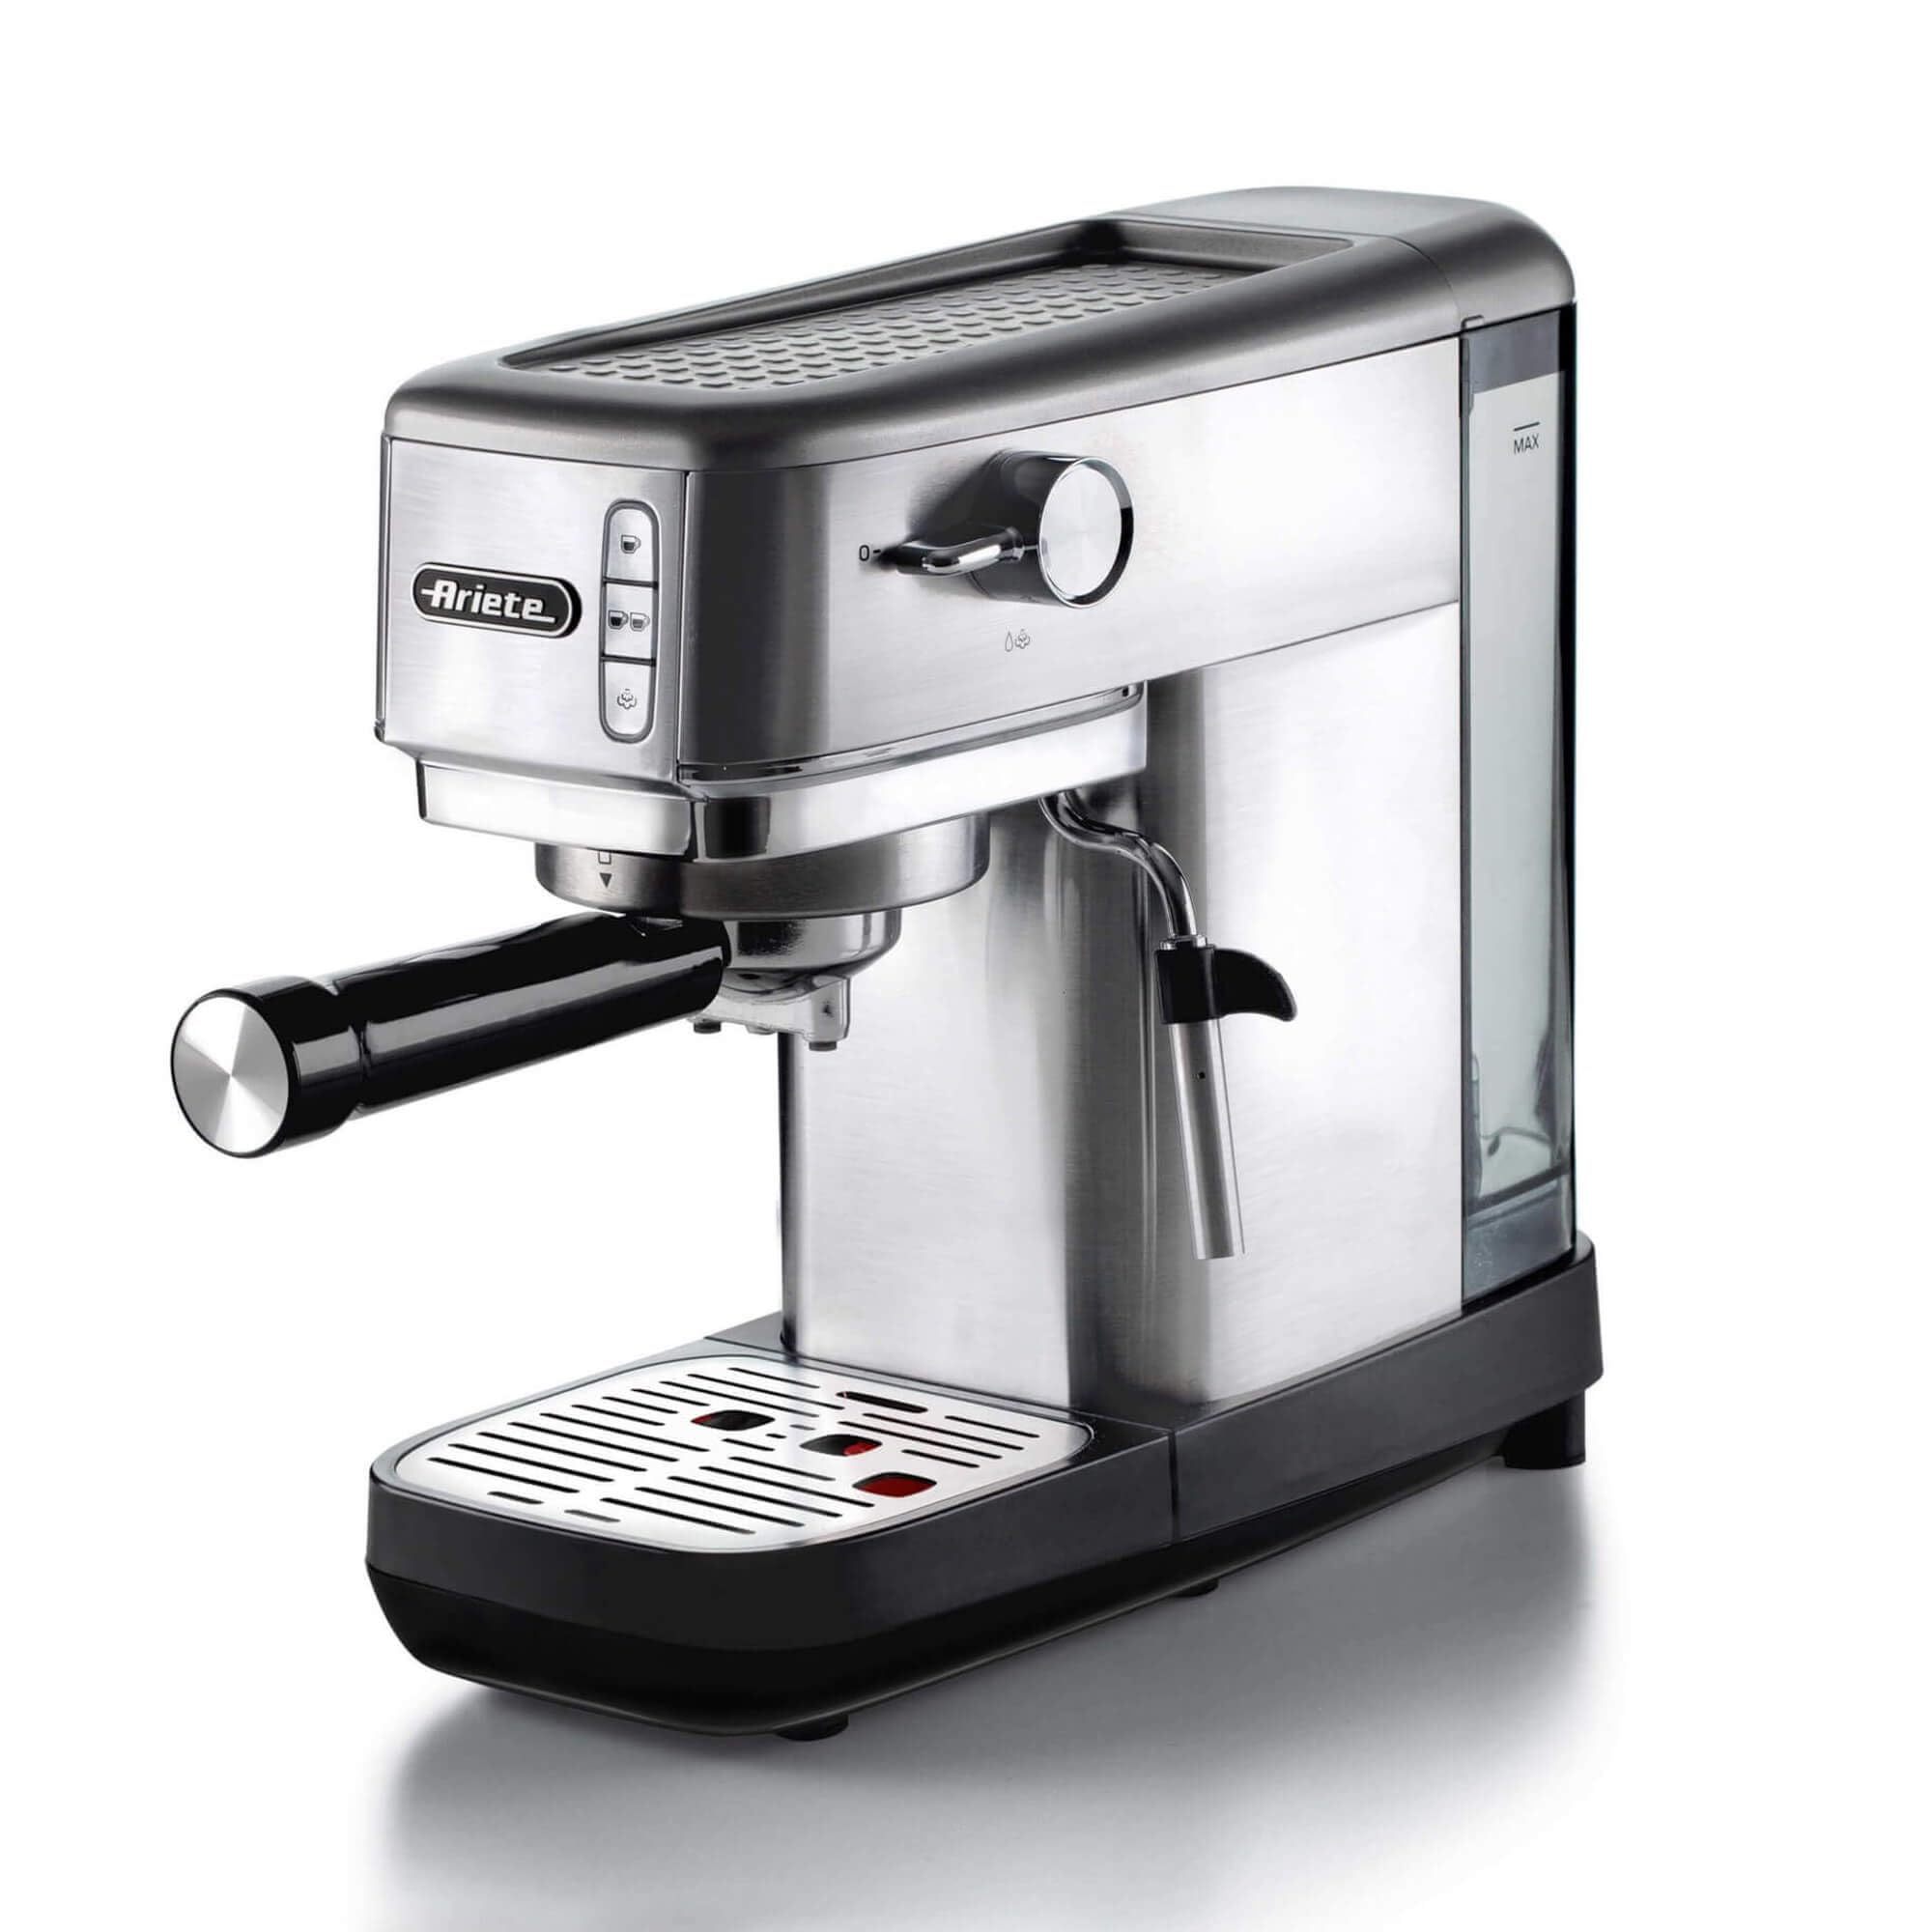 Ariete Pump Espresso Coffee Maker Machine with Milk Frother, 1300W, Stainless Steel, ESE Pod and Ground Coffee Compatible, 15 Bar Pressure, Auto shut-off, Ideal for Home and Offiice (OPEN-BOX)